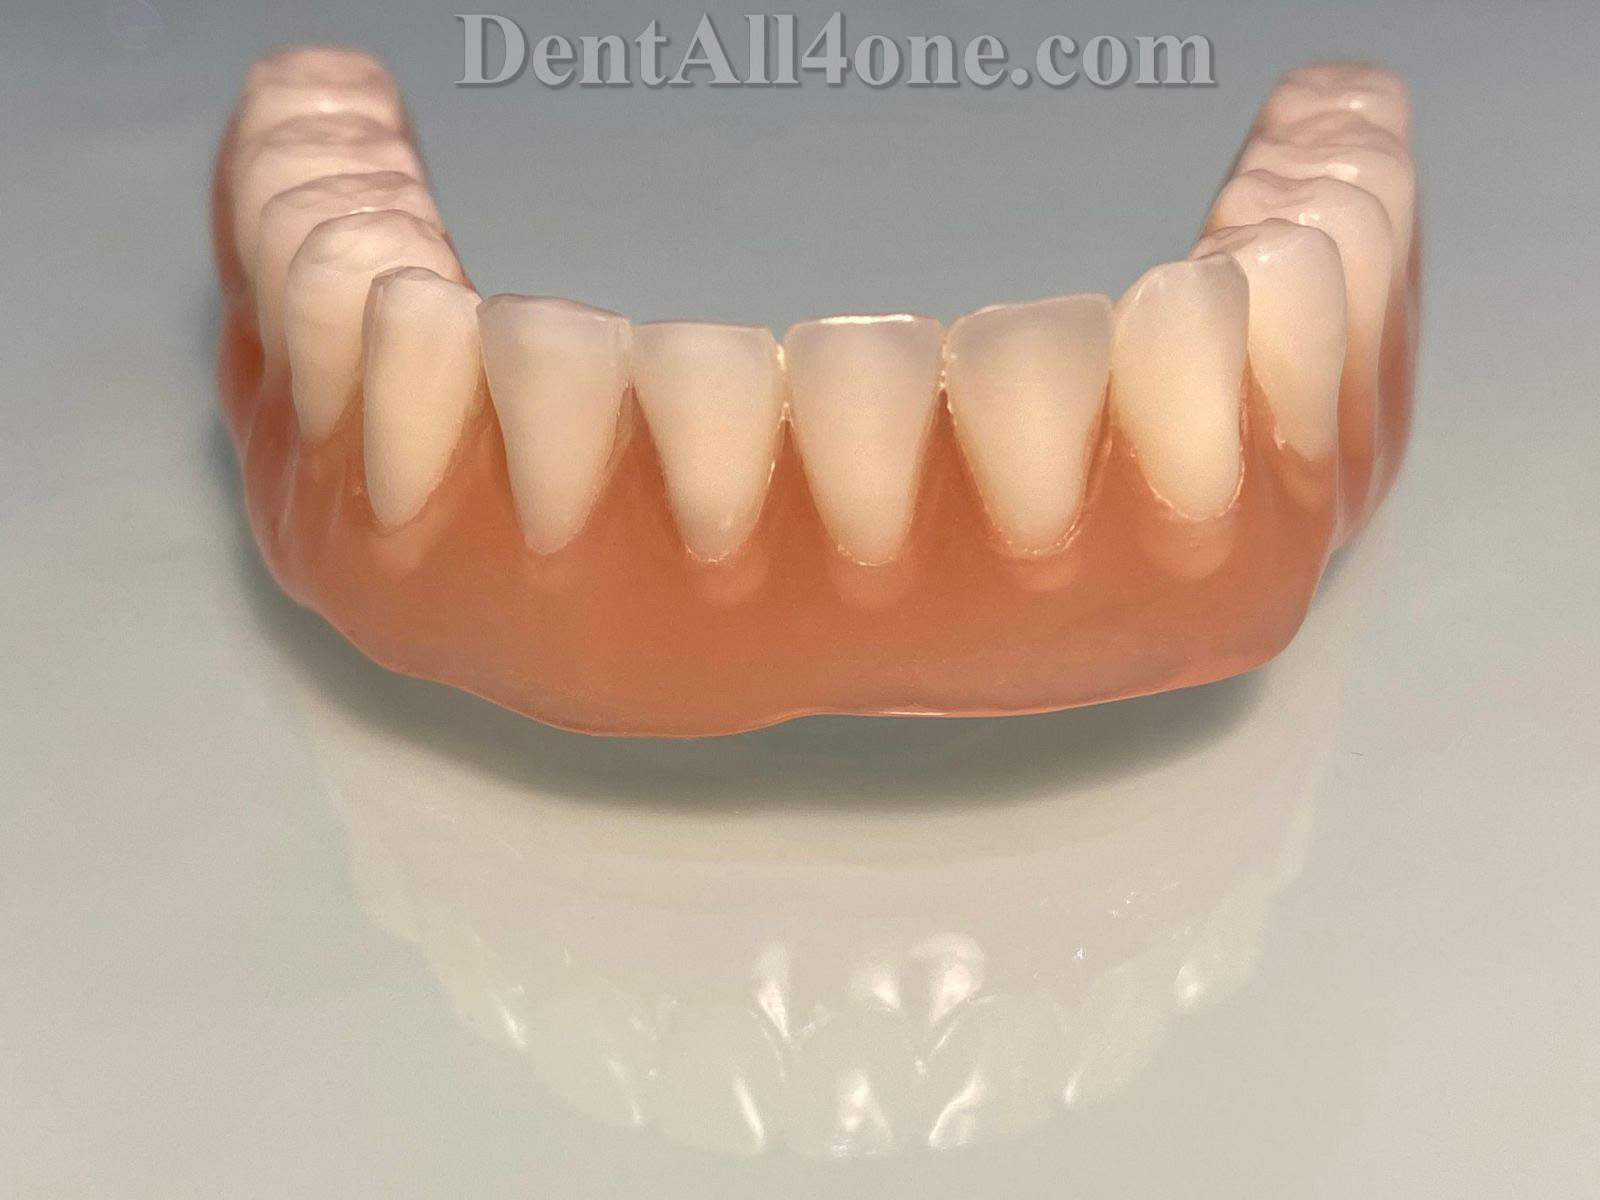 Vollprothese 2 - www.dentall4one.com